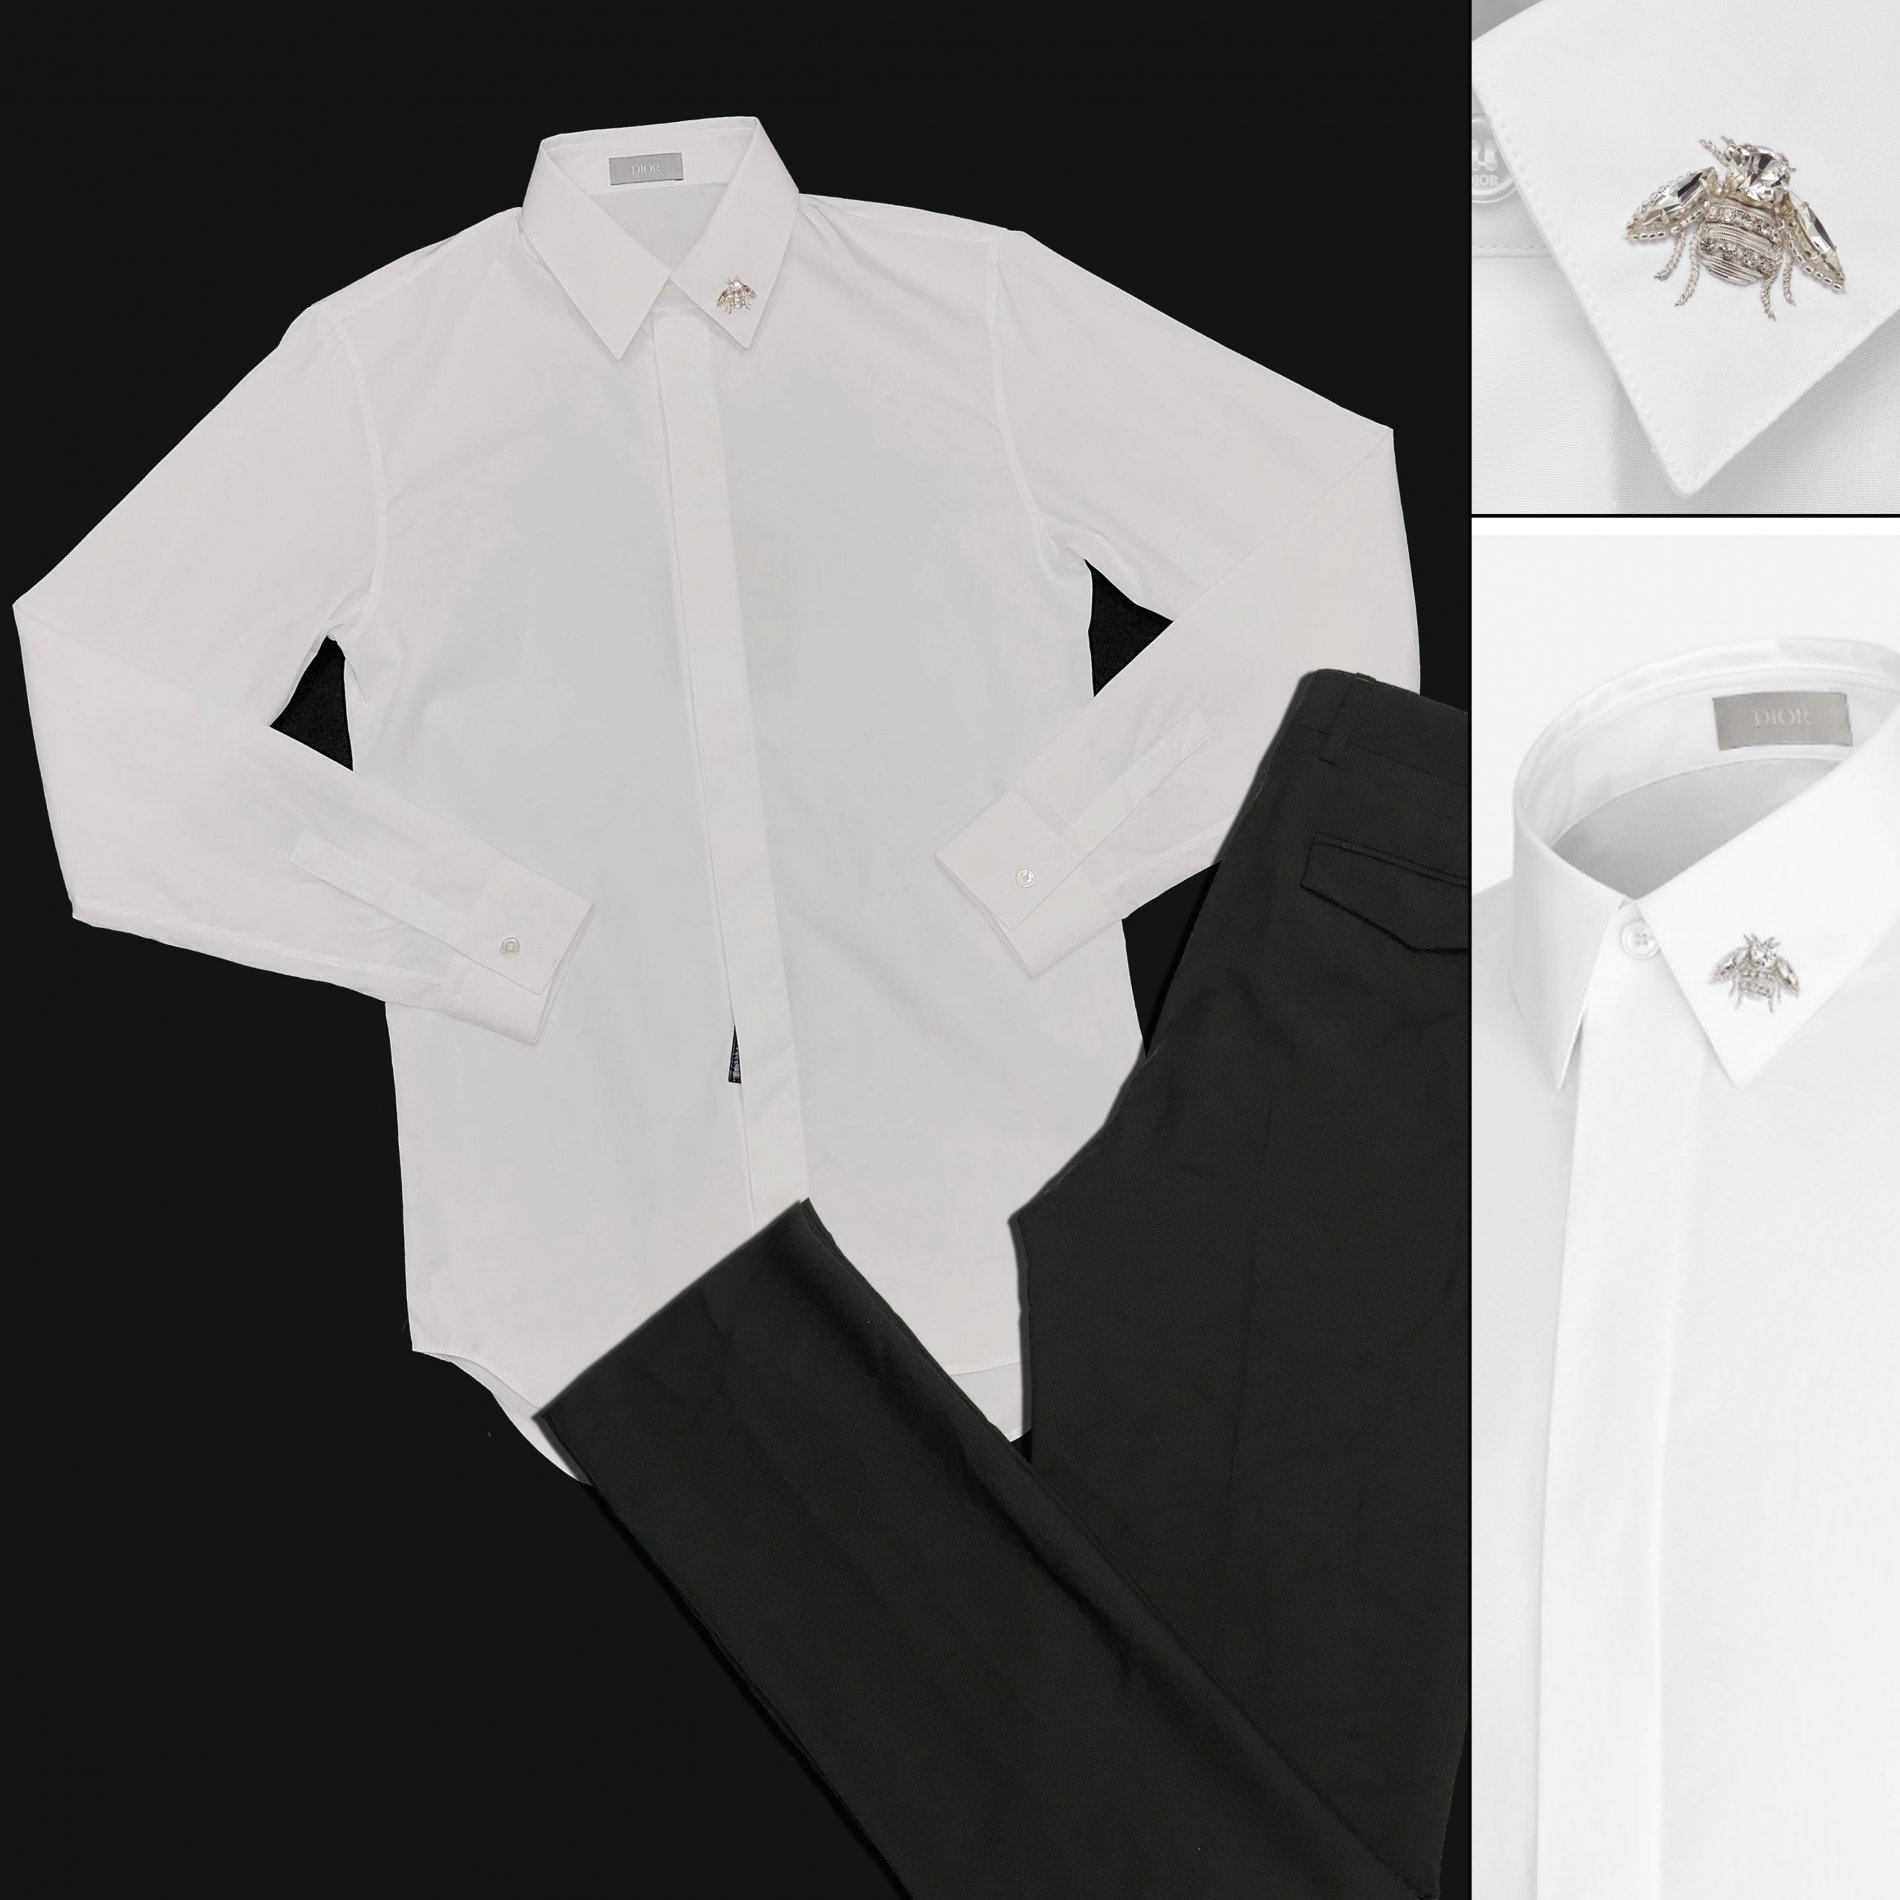 DIOR HOMME Shirt With Bee Jewel White Cotton Poplin (Ong 3D) (4).jpg